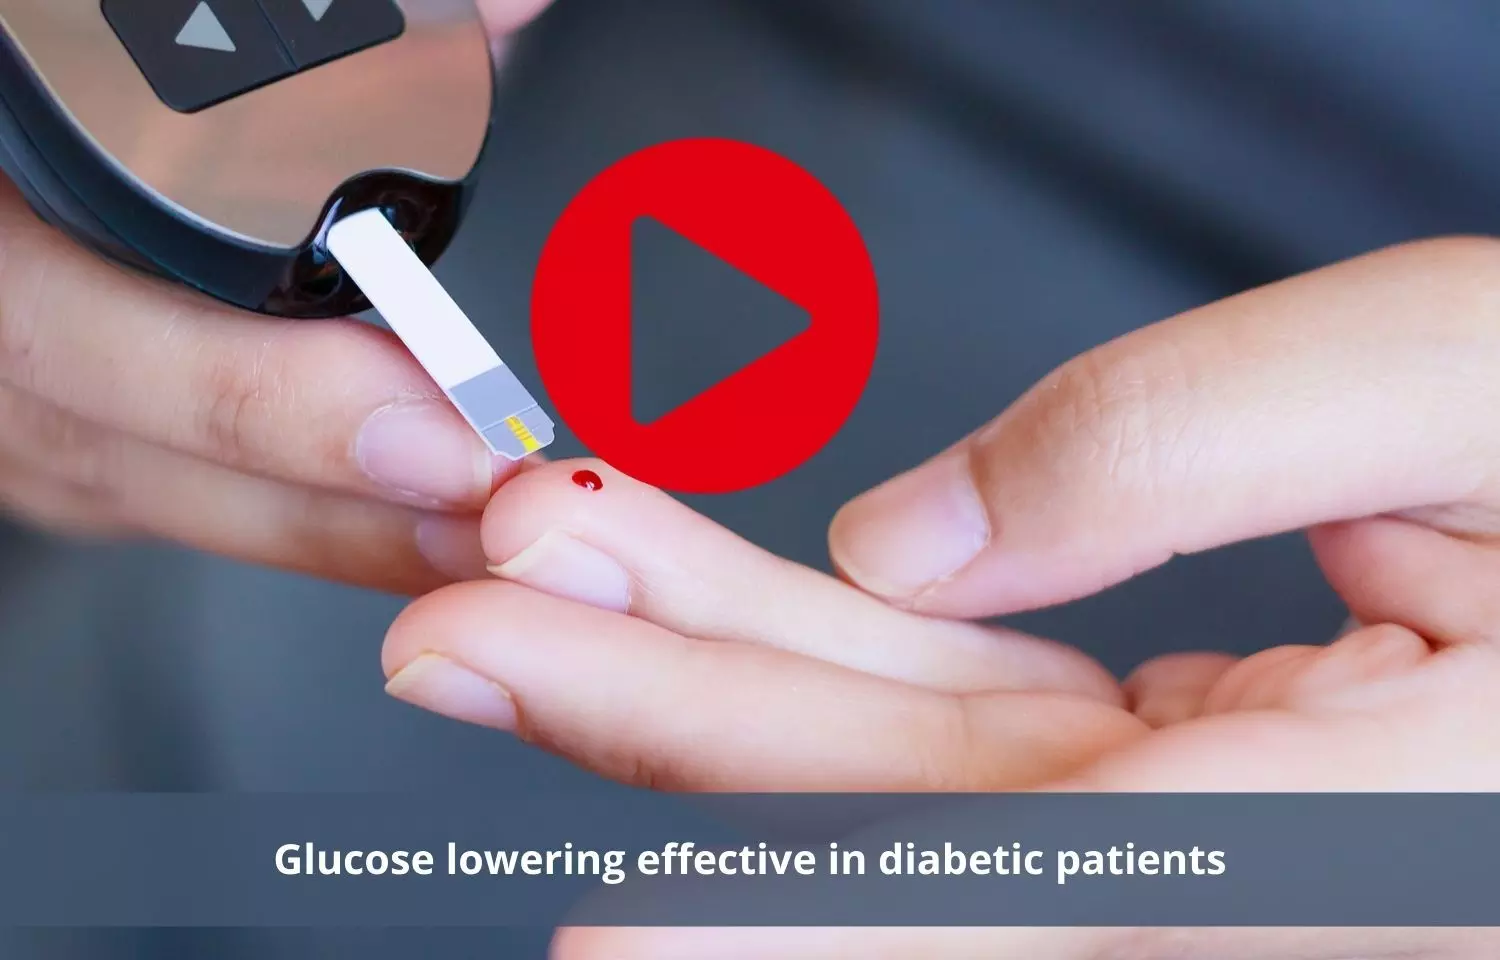 Lowering Glucose levels reduces complication risk in diabetes patients with ASCVD